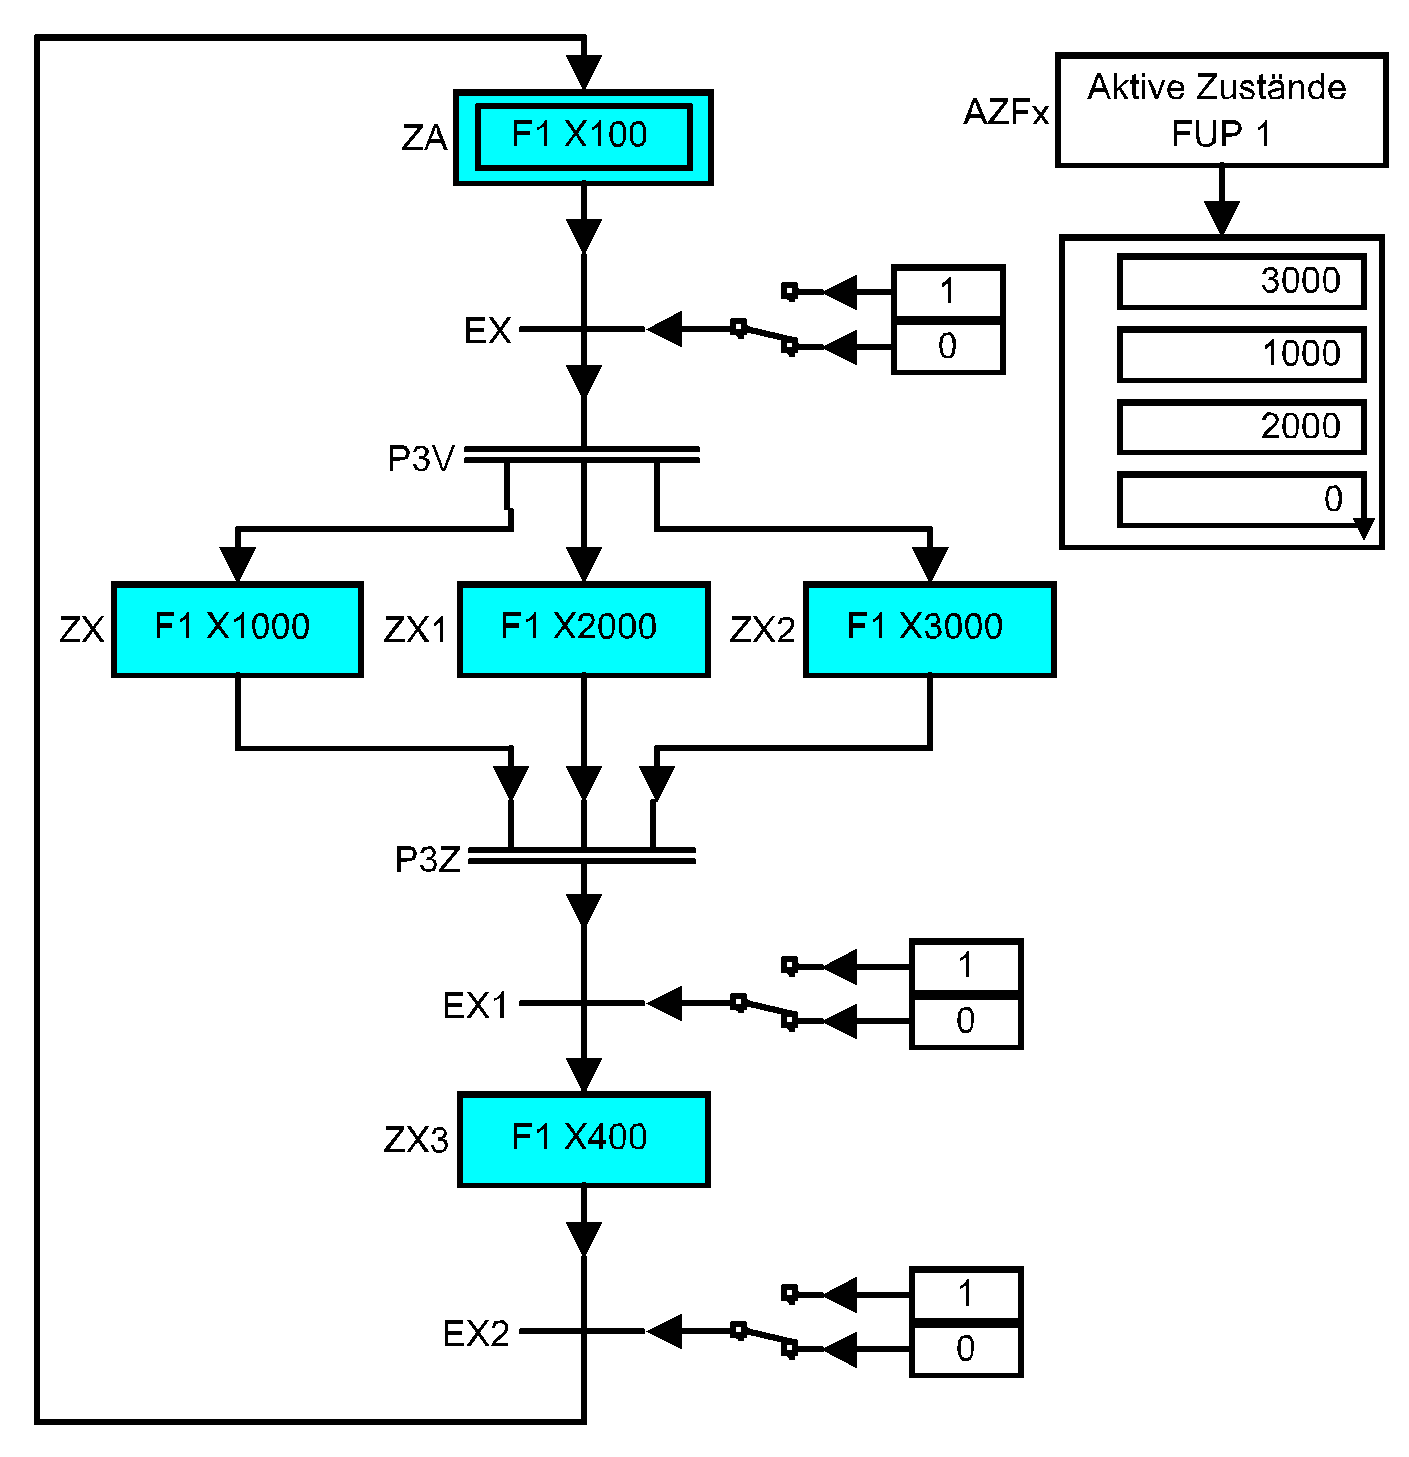 Example 5: Parallel branching without event within